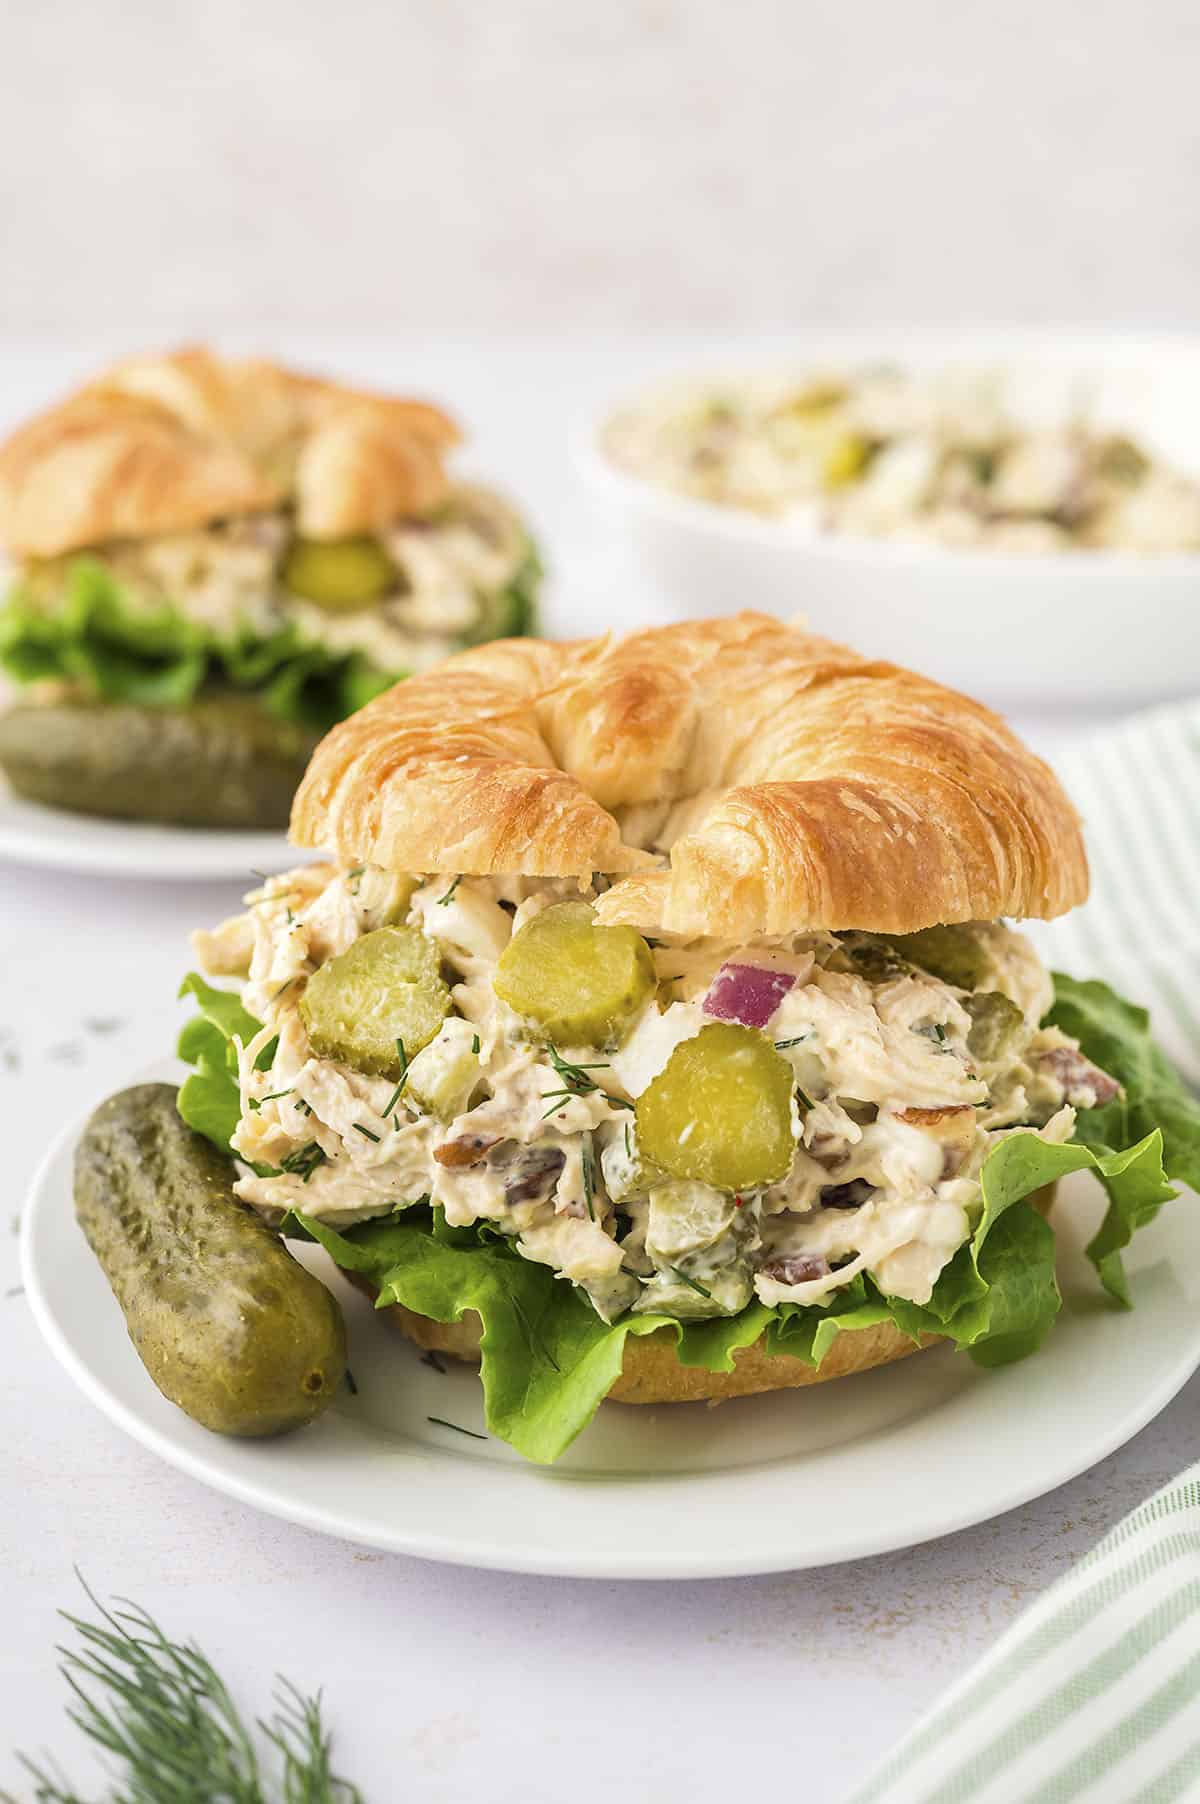 Dill pickle chicken salad on croissant on white plate.